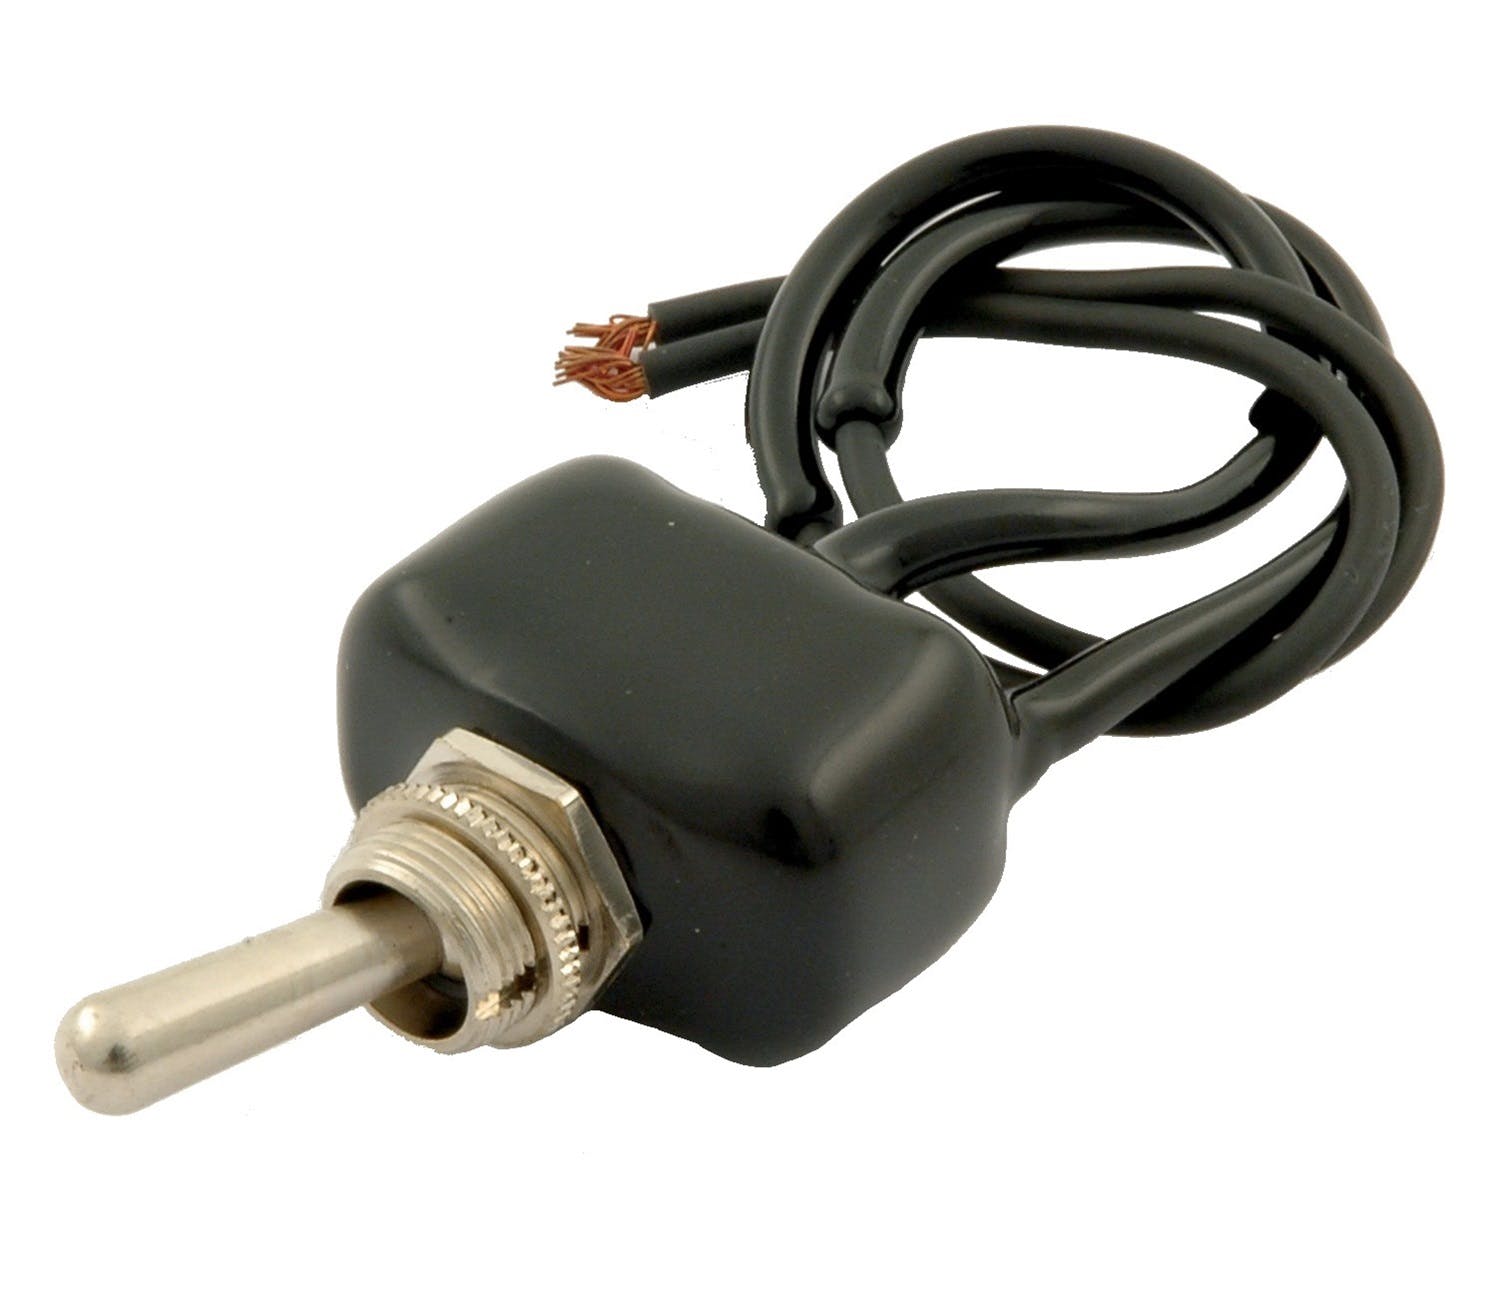 Taylor Cable Products 1026 Toggle Switch on/off waterproof